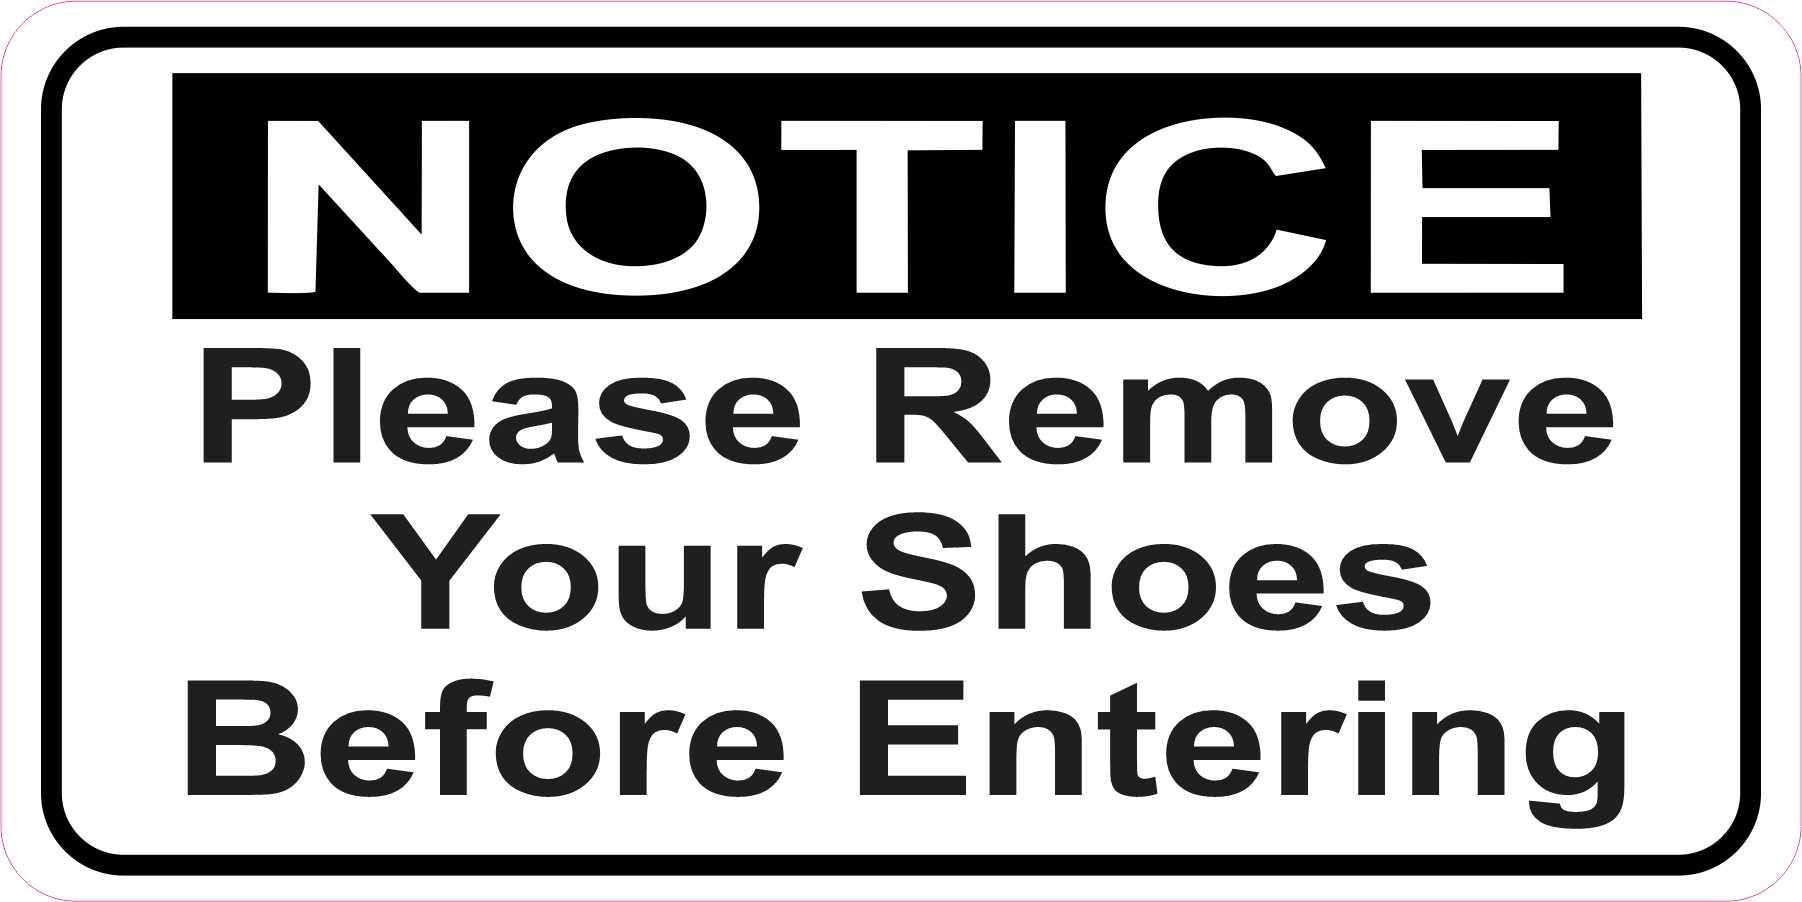 Stickertalk Remove Shoes Before Entering Vinyl Sticker 6 Inches X 3 Inches